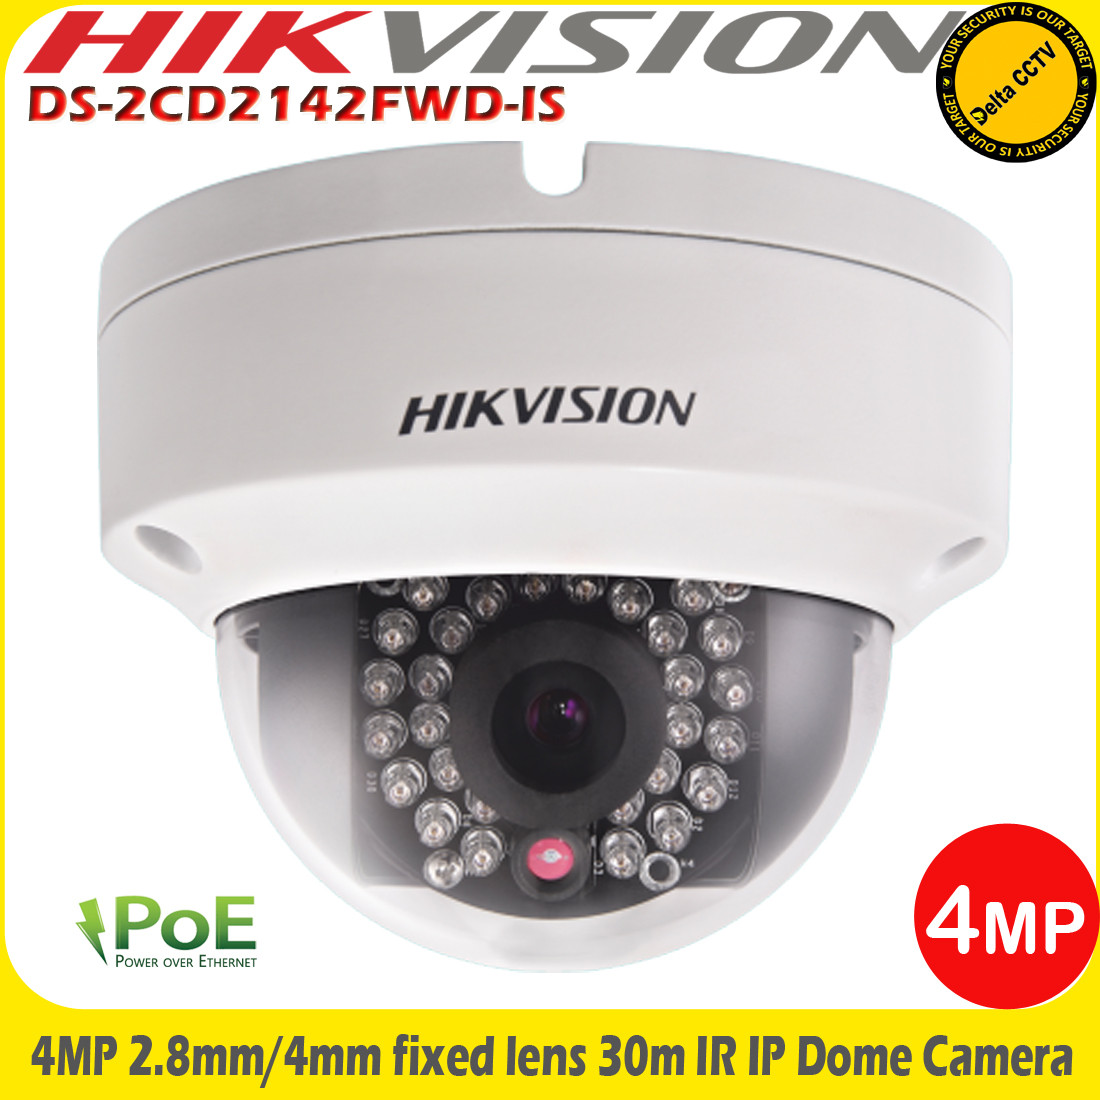 Hikvision DS-2CD2142FWD-IS 4MP 2.8mm/4mm fixed lens 30M IR